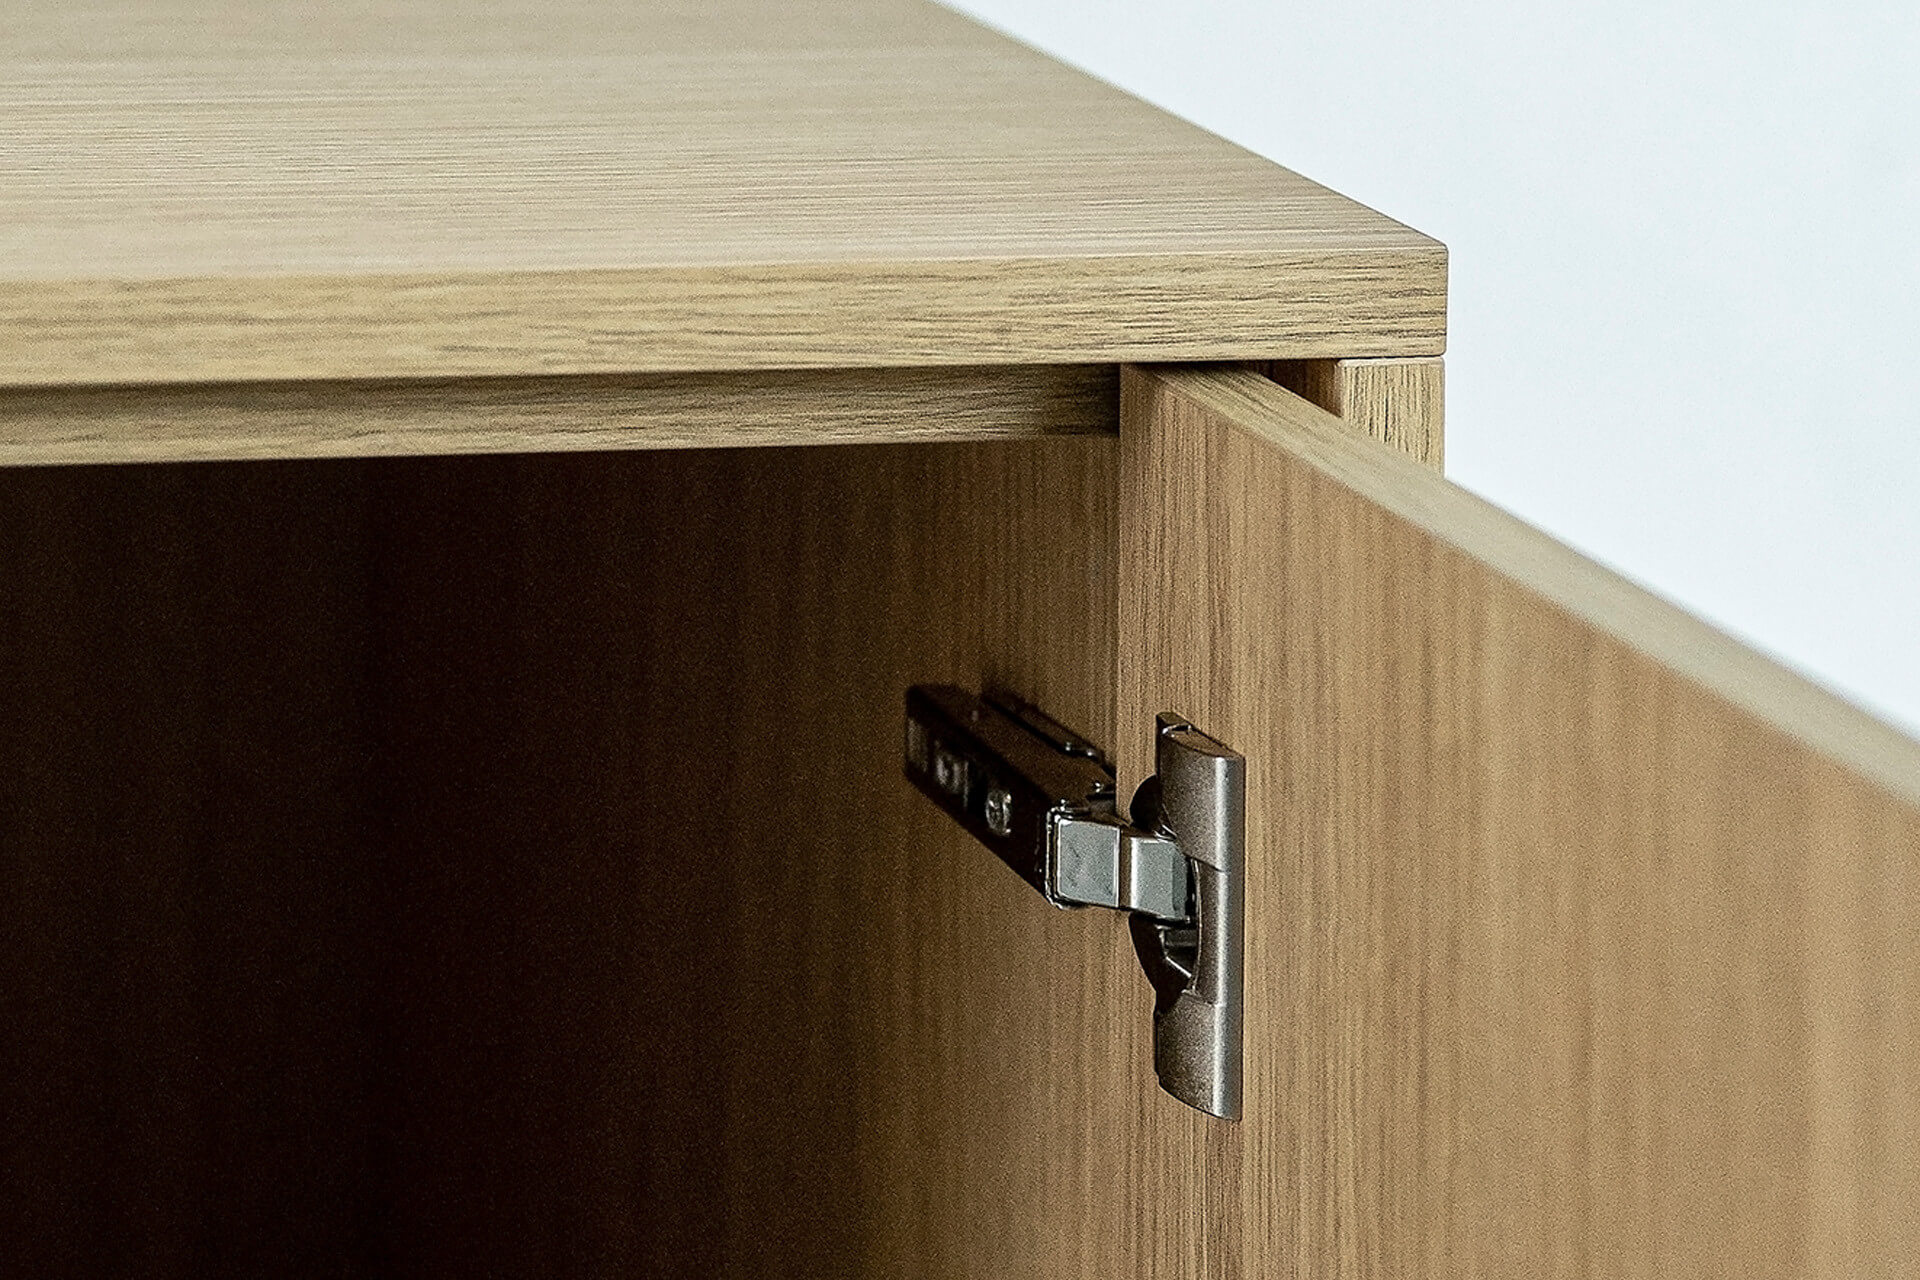 Blum hinge for a TV unit in the colour Essential Oak Natural, from maatkastenonline